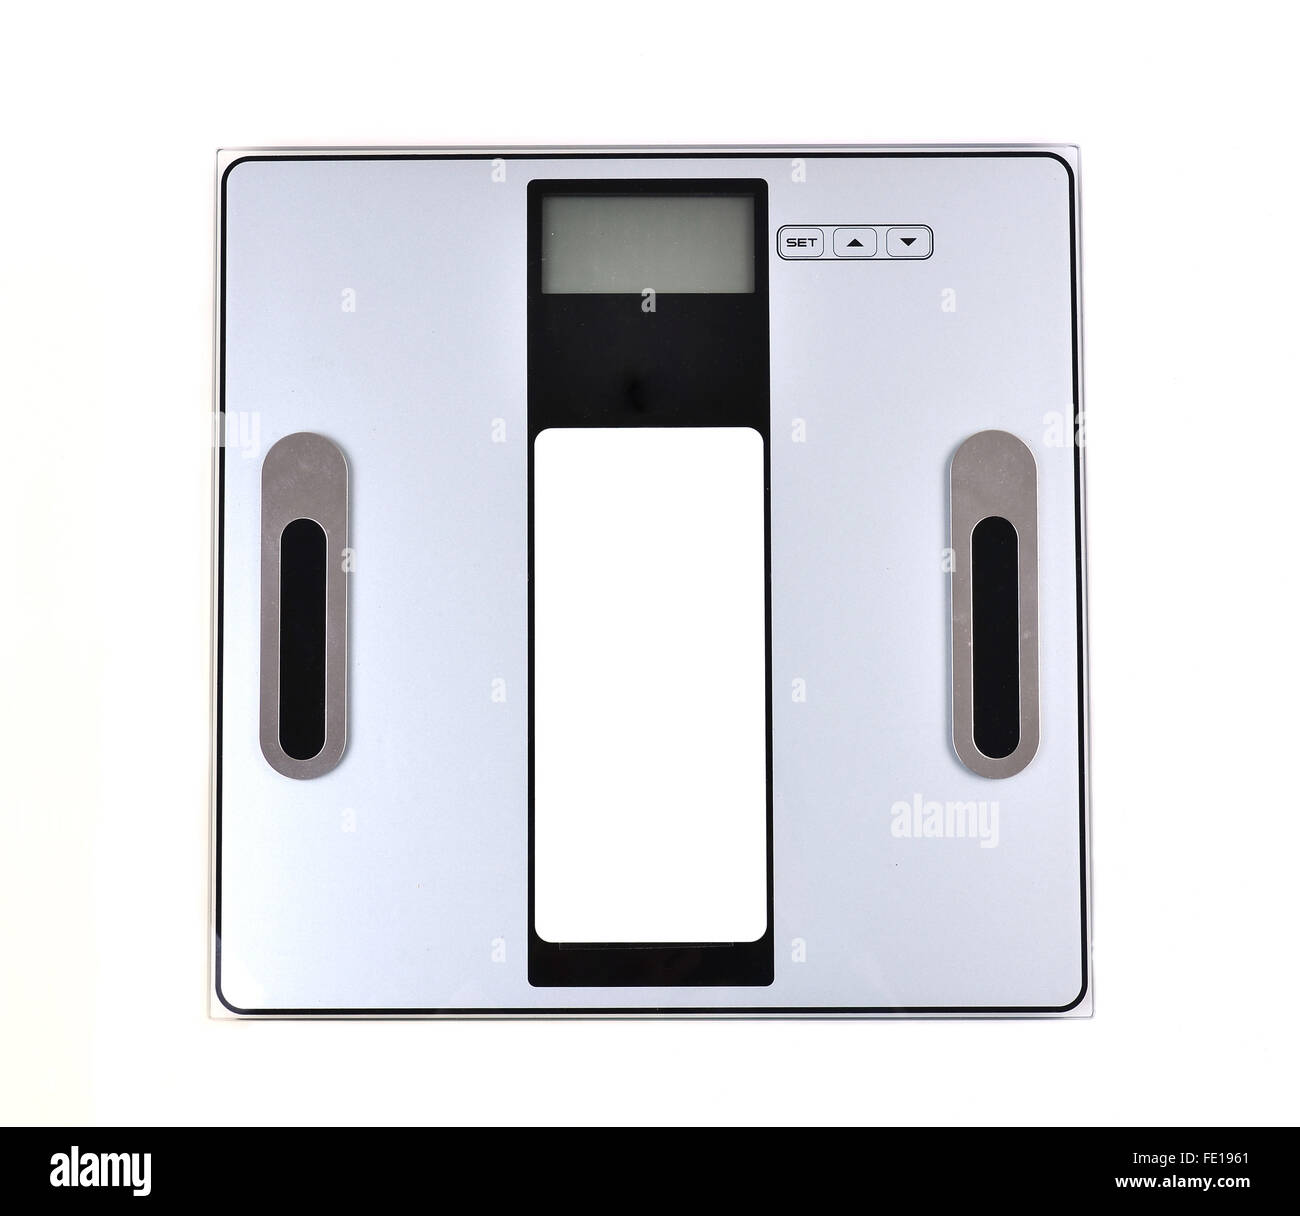 digital weight scale isolated on white background Stock Photo